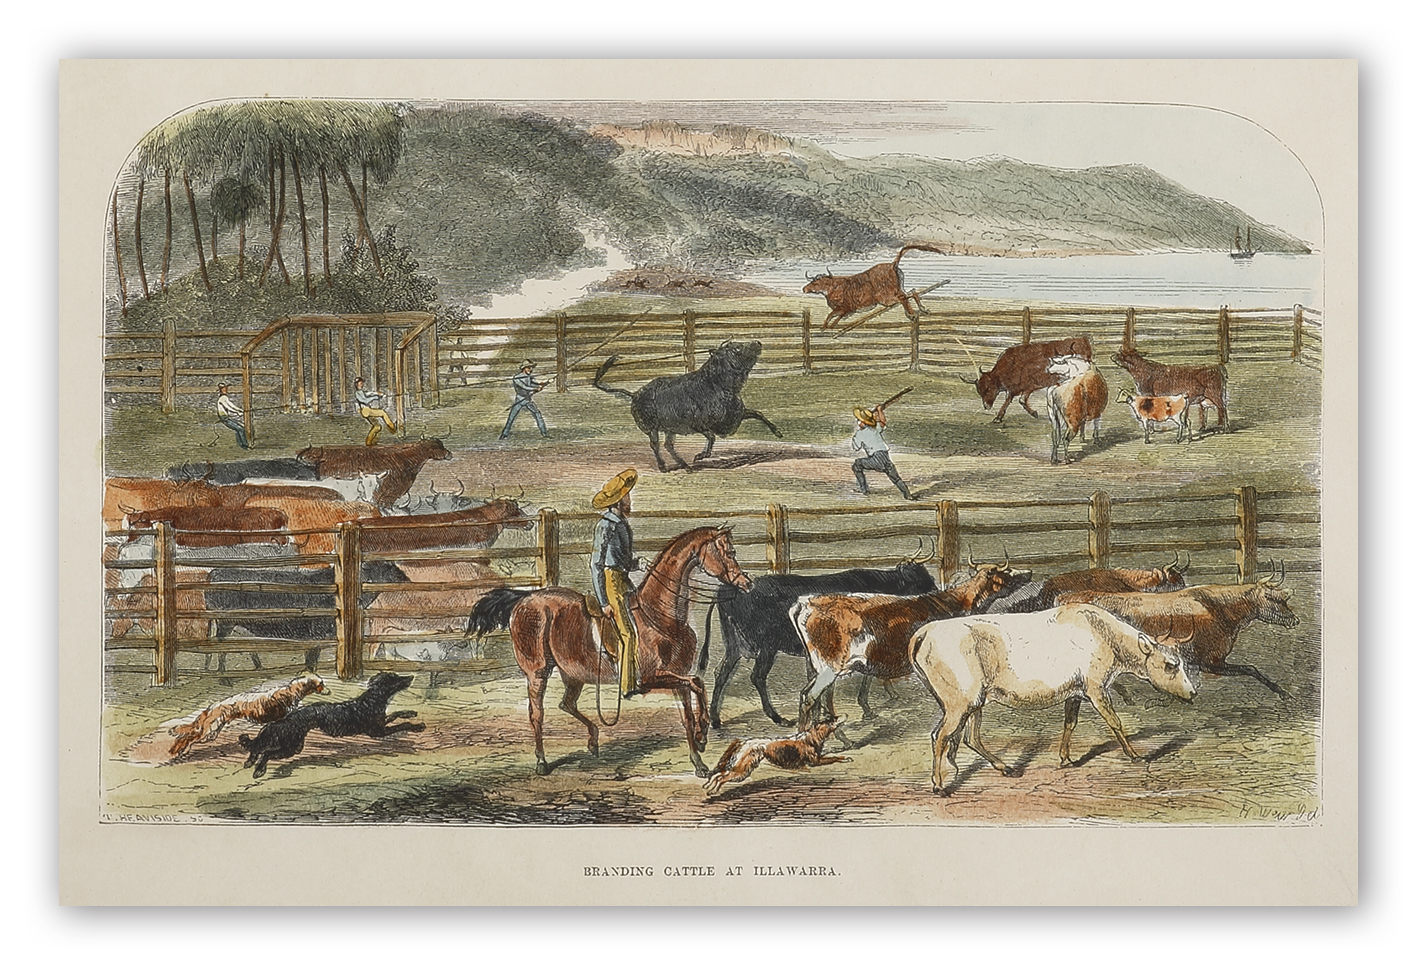 Branding Cattle at Illawarra. - Antique View from 1852